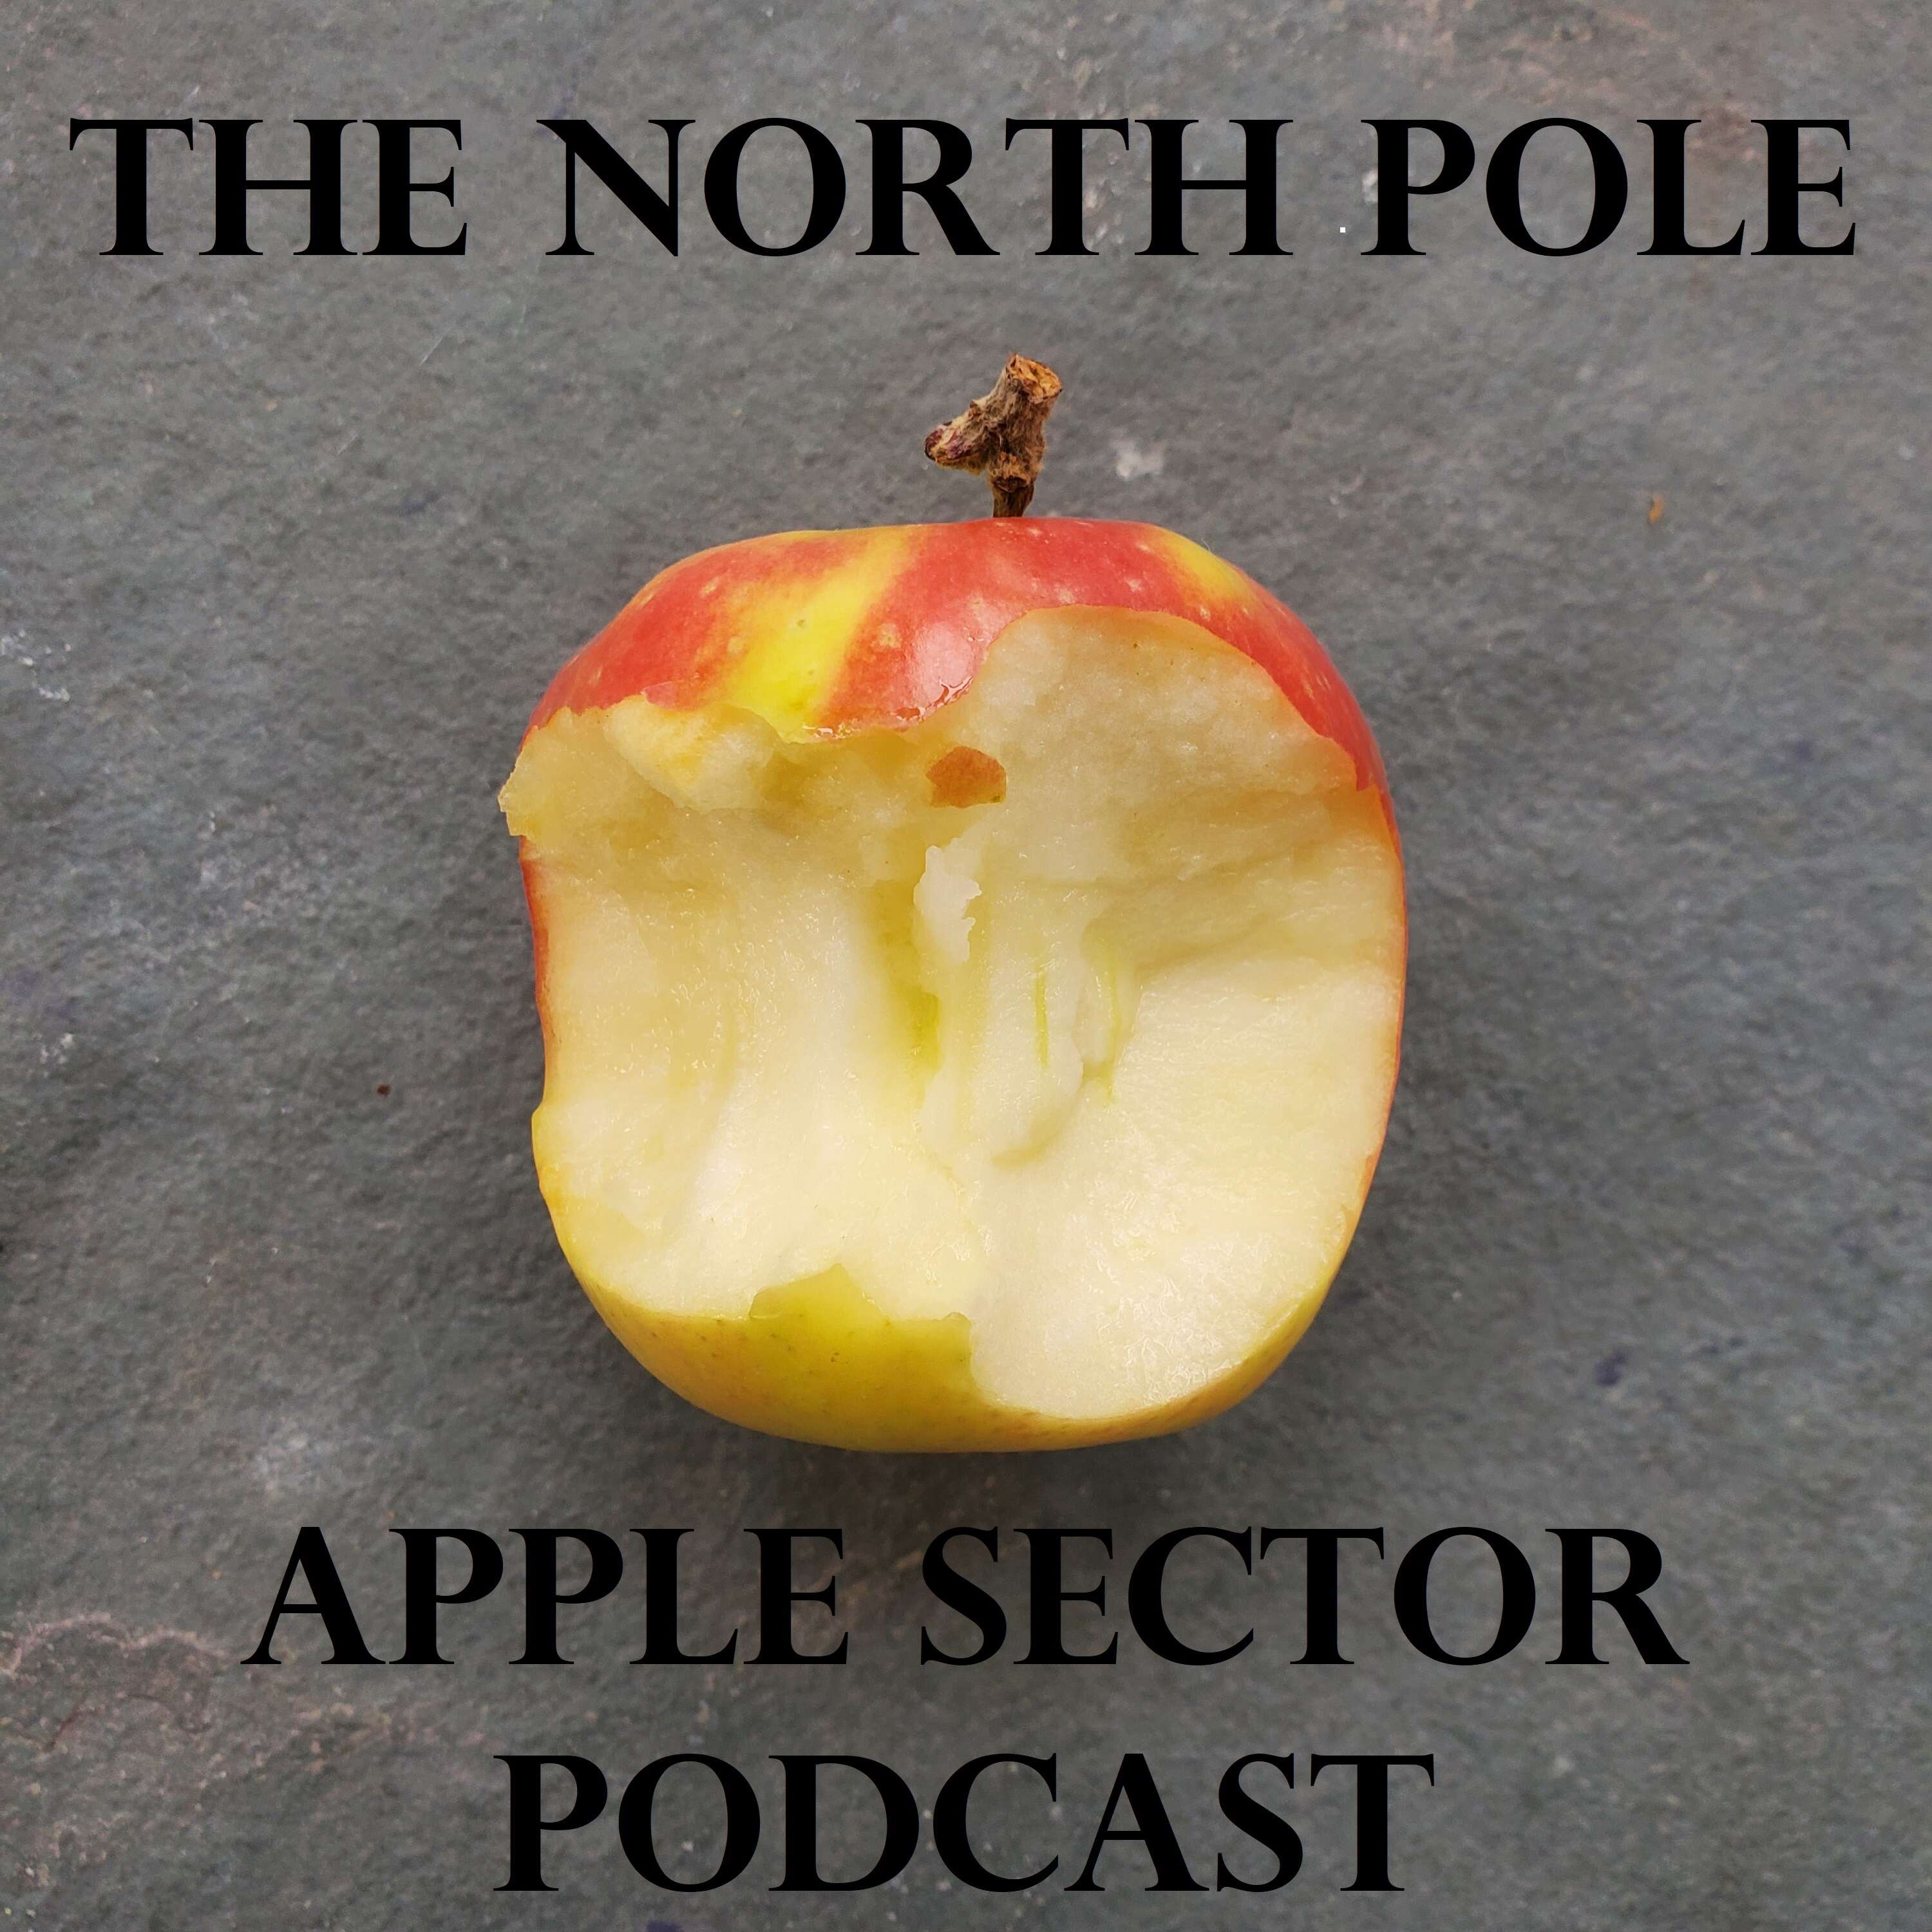 Artwork for The North Pole Apple Sector Podcast